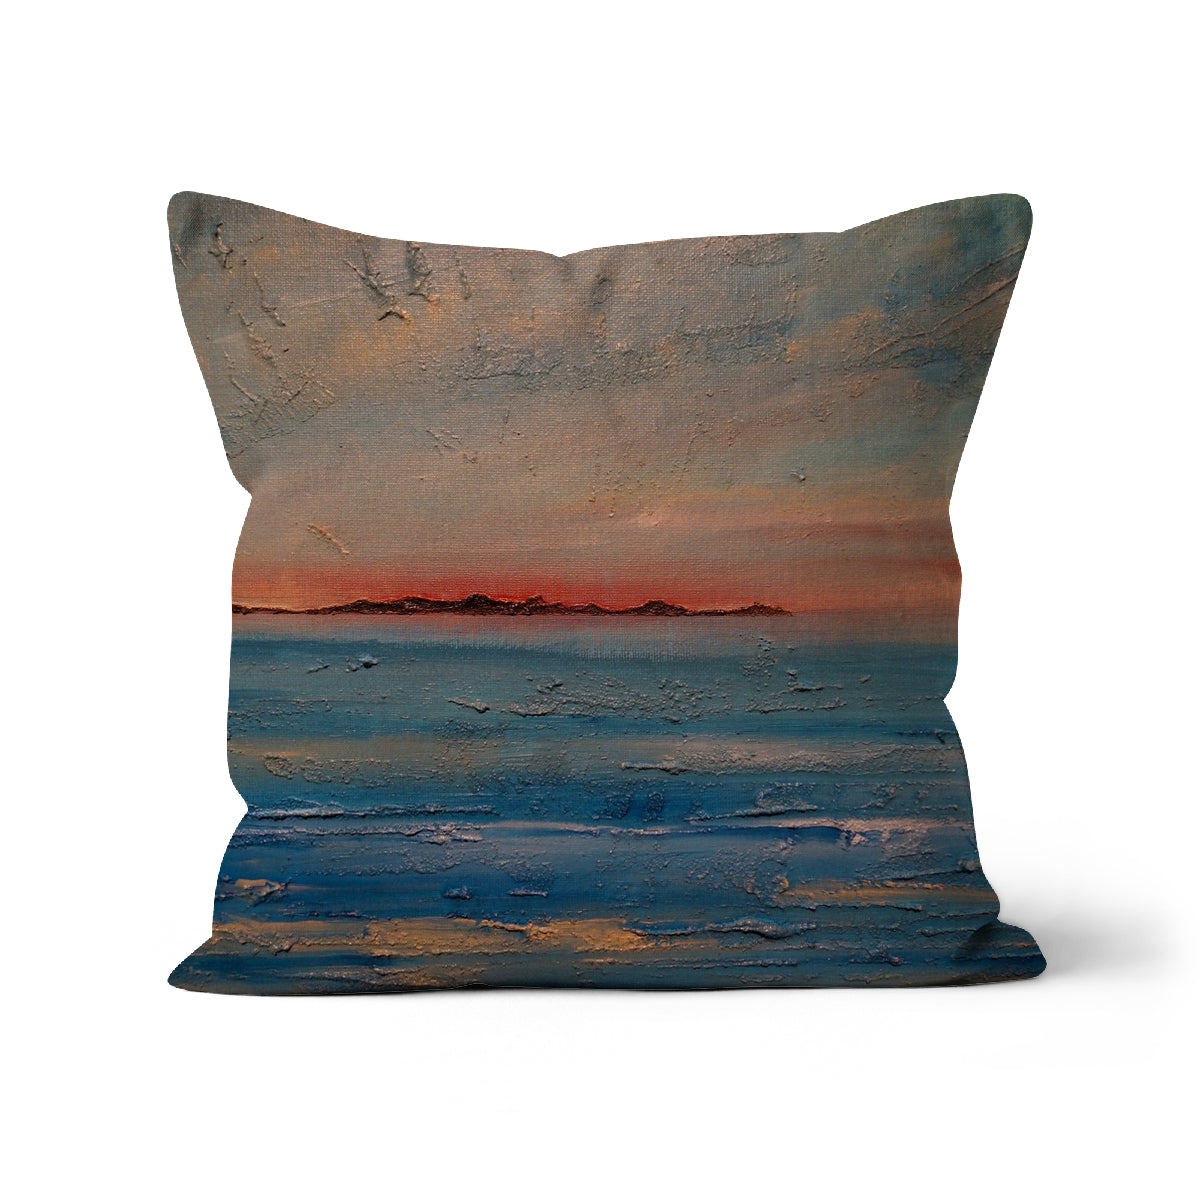 Gigha Sunset Art Gifts Cushion-Cushions-Hebridean Islands Art Gallery-Linen-18"x18"-Paintings, Prints, Homeware, Art Gifts From Scotland By Scottish Artist Kevin Hunter